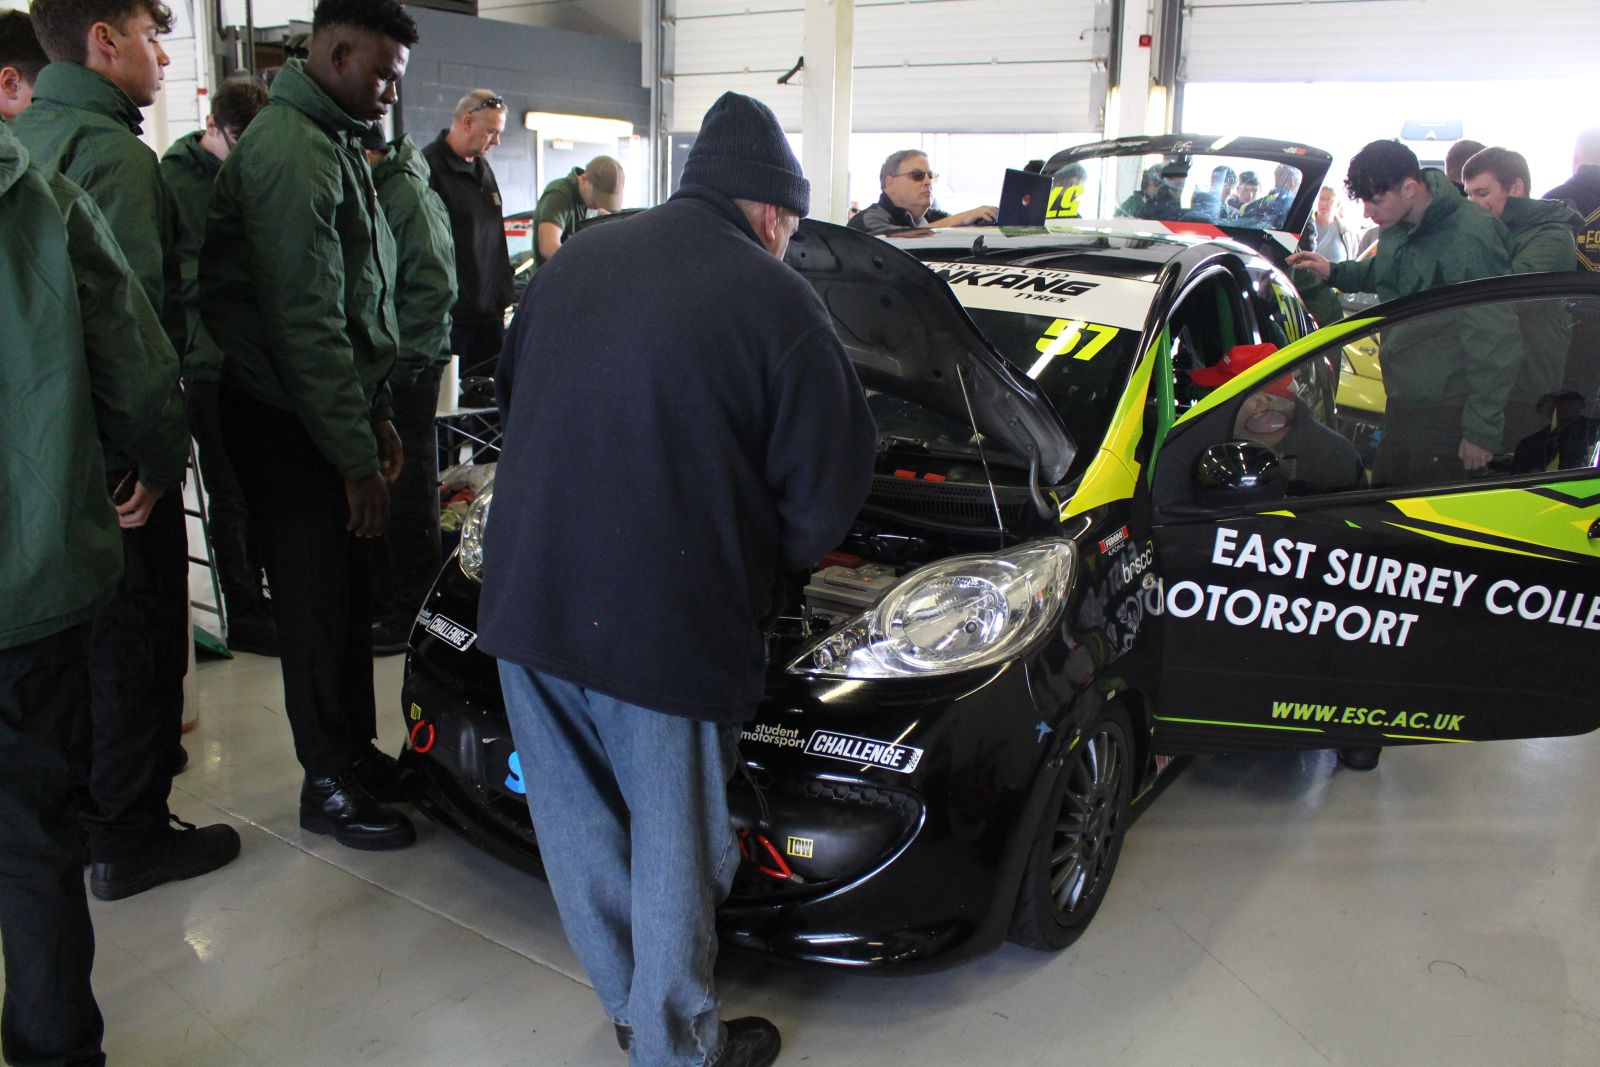 Motorsport students and staff working on the car before round 17